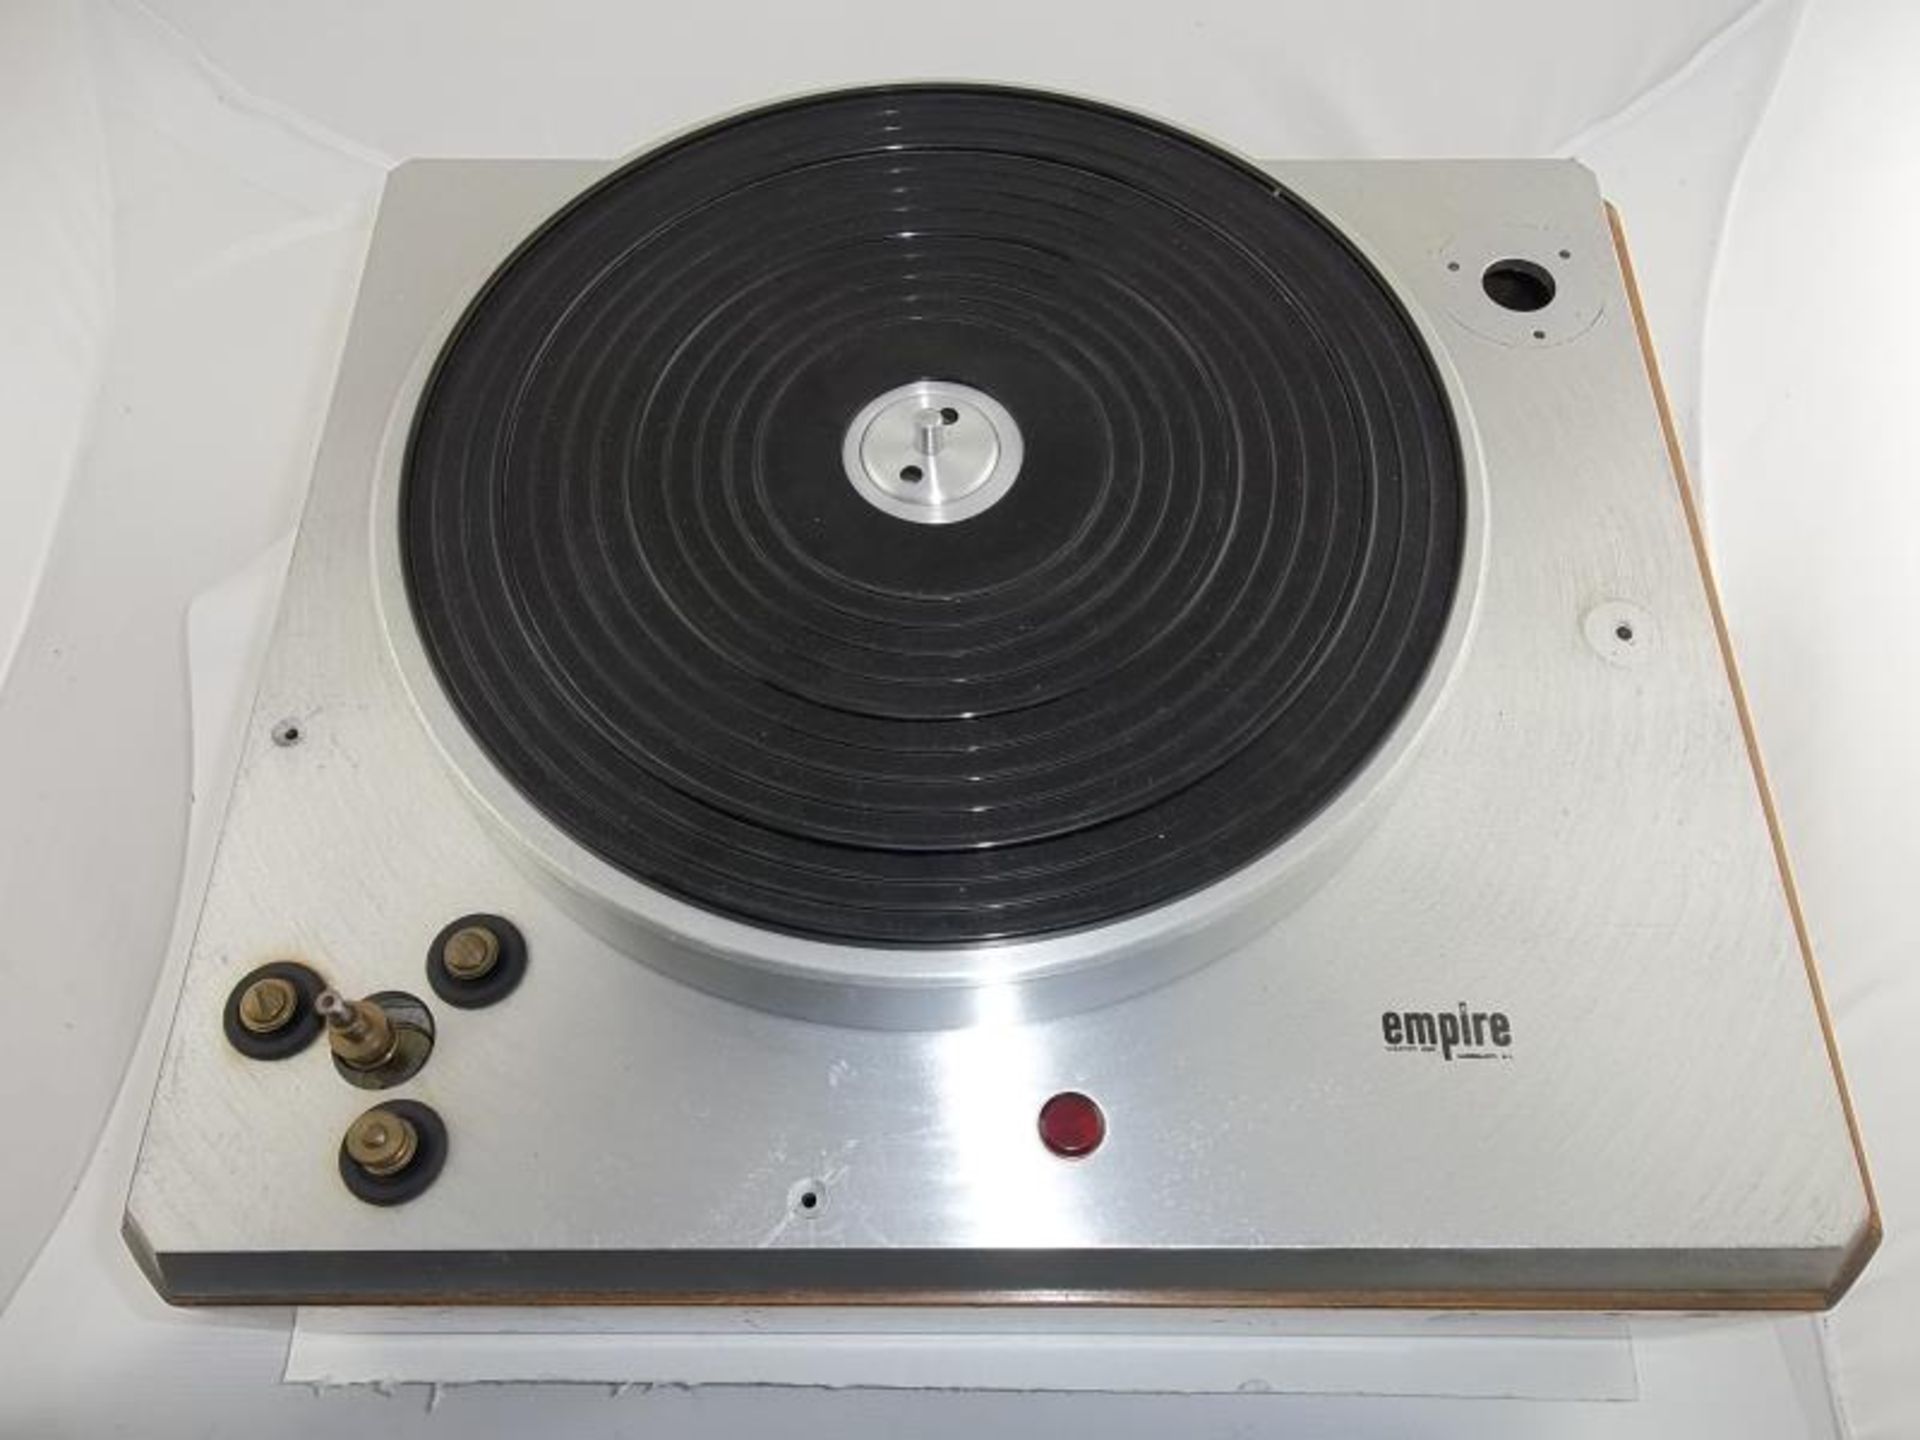 Empire turntable, no arm, no corner plate, brushed silver finish, #28795 - Image 2 of 3